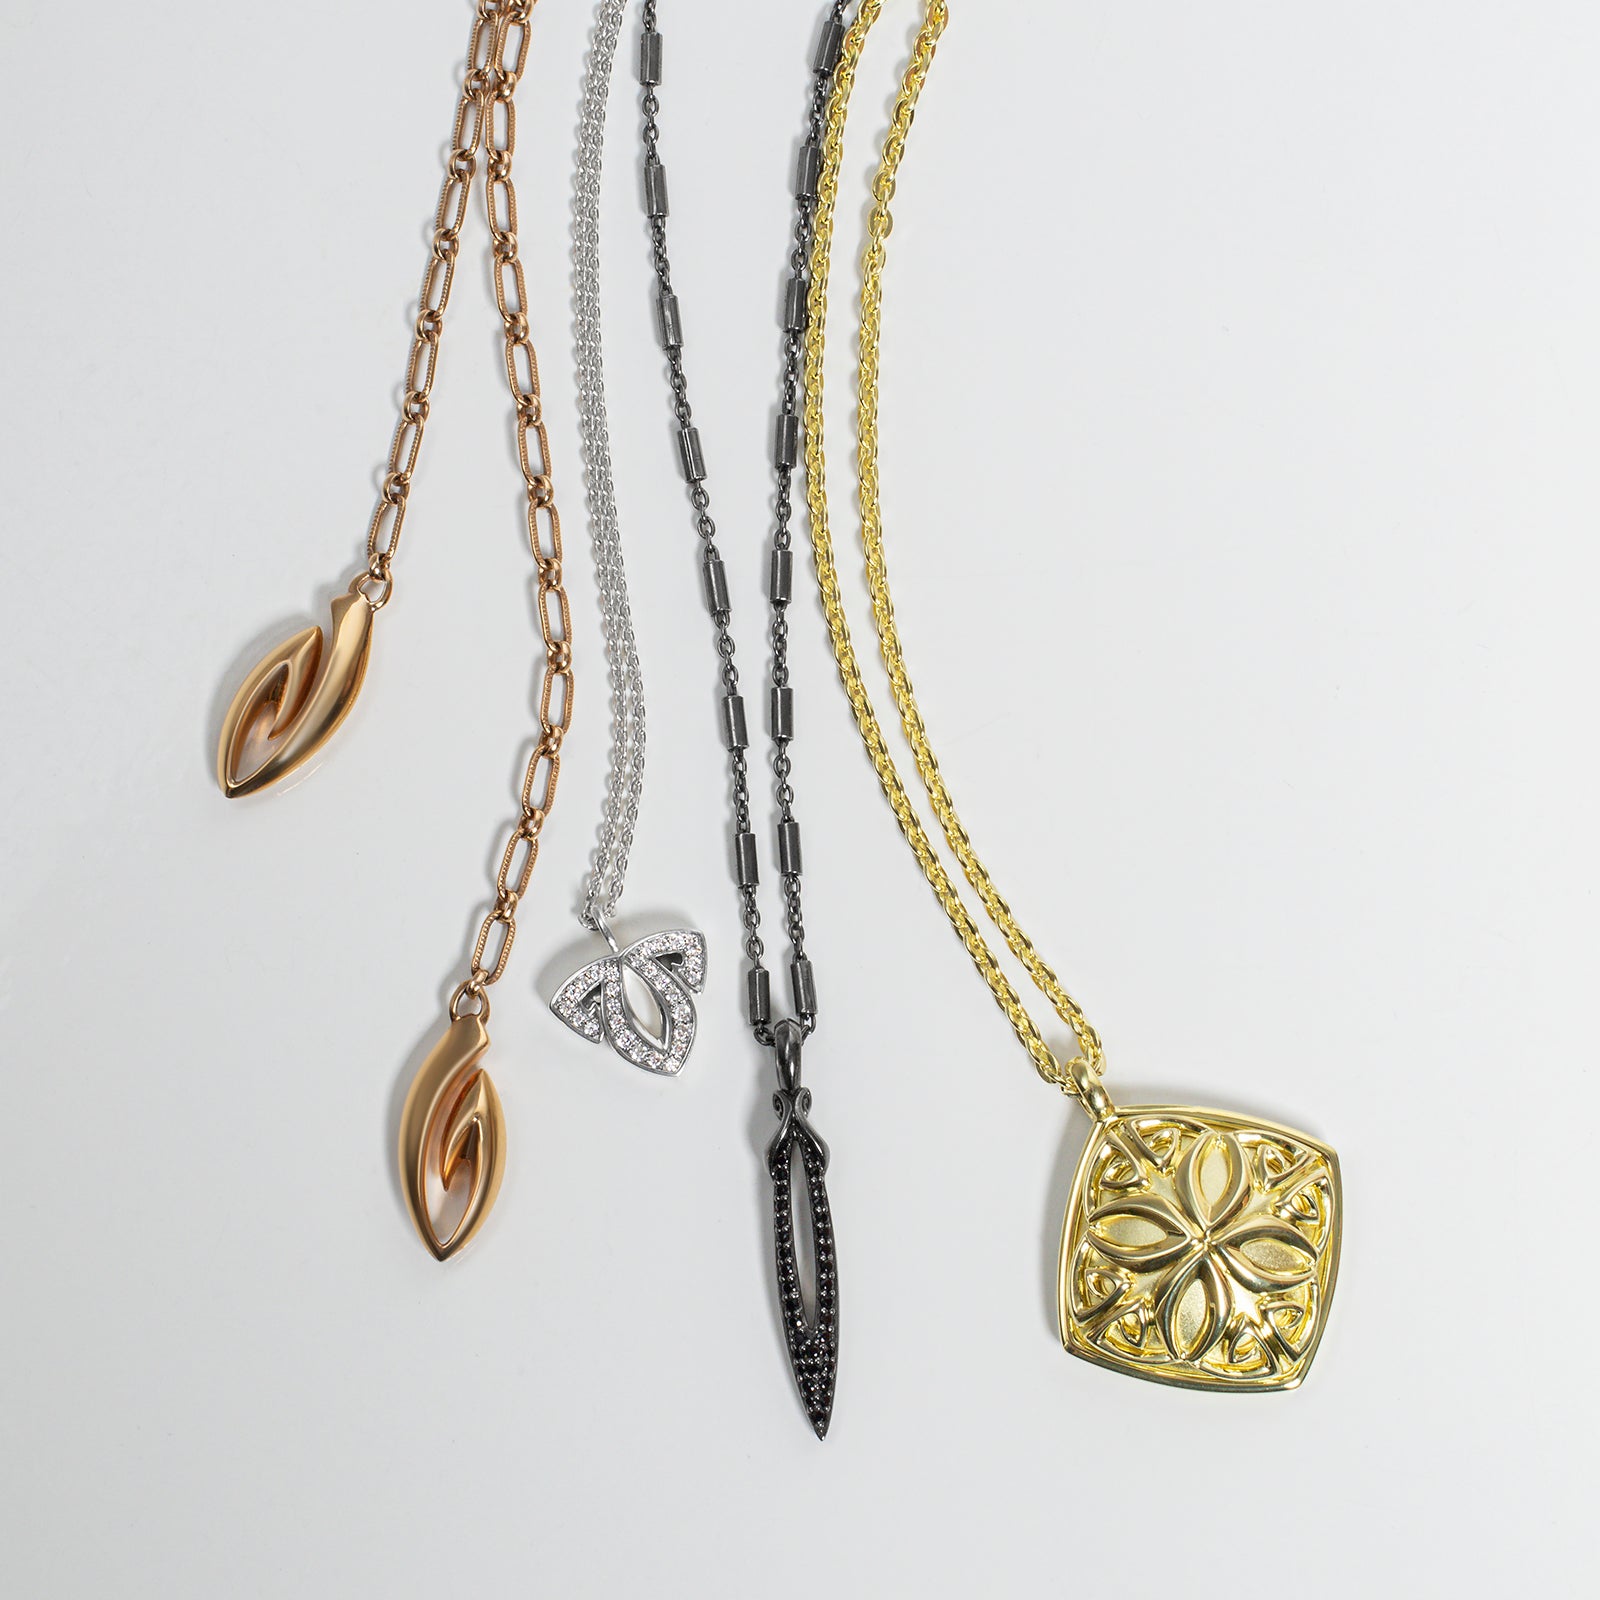 NECKLACES from elegant to edgy from REALM Fine + Fashion Jewelry